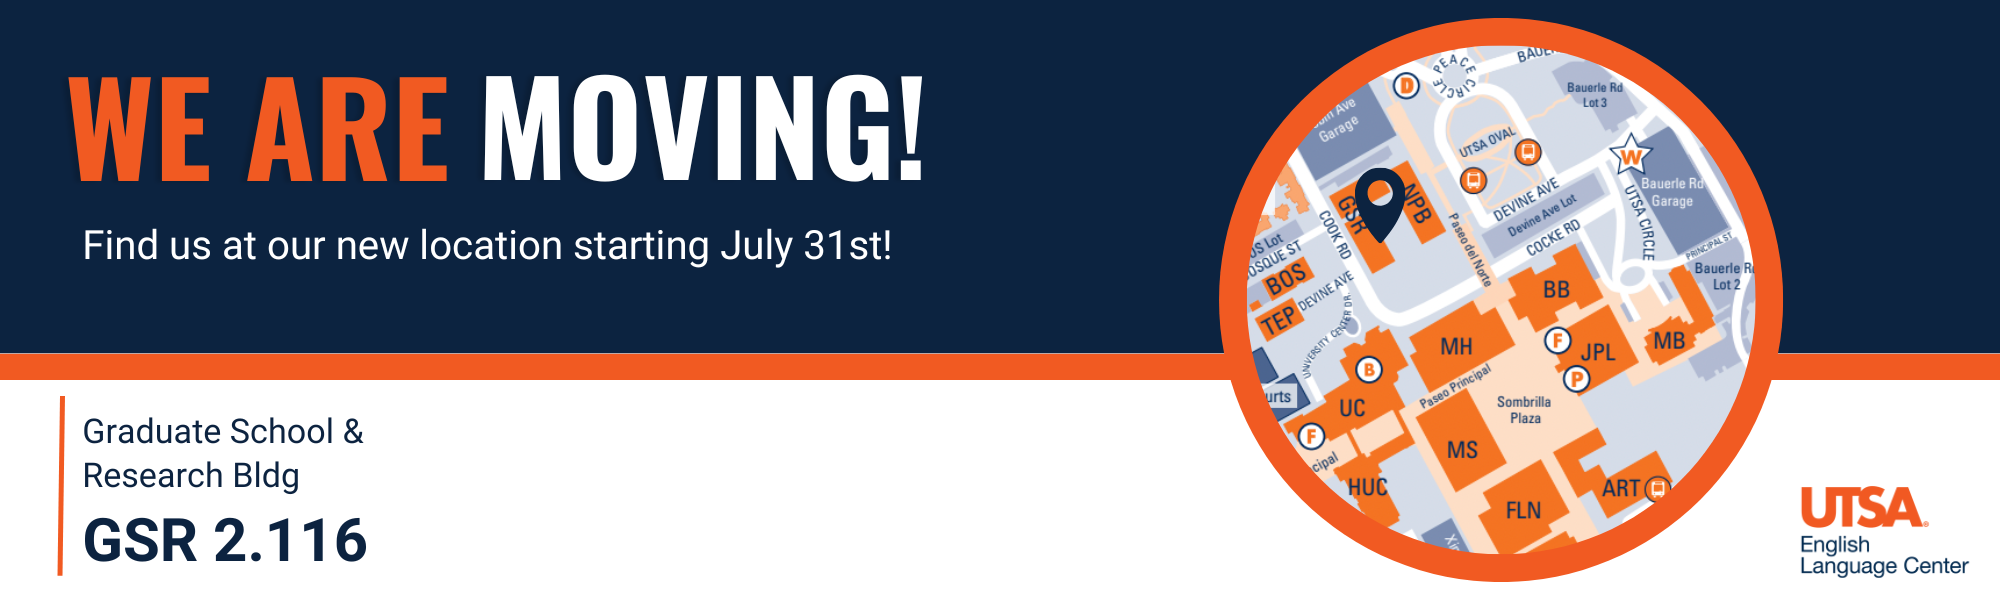 Our office is moving to GSR 2.116 starting July 31st!